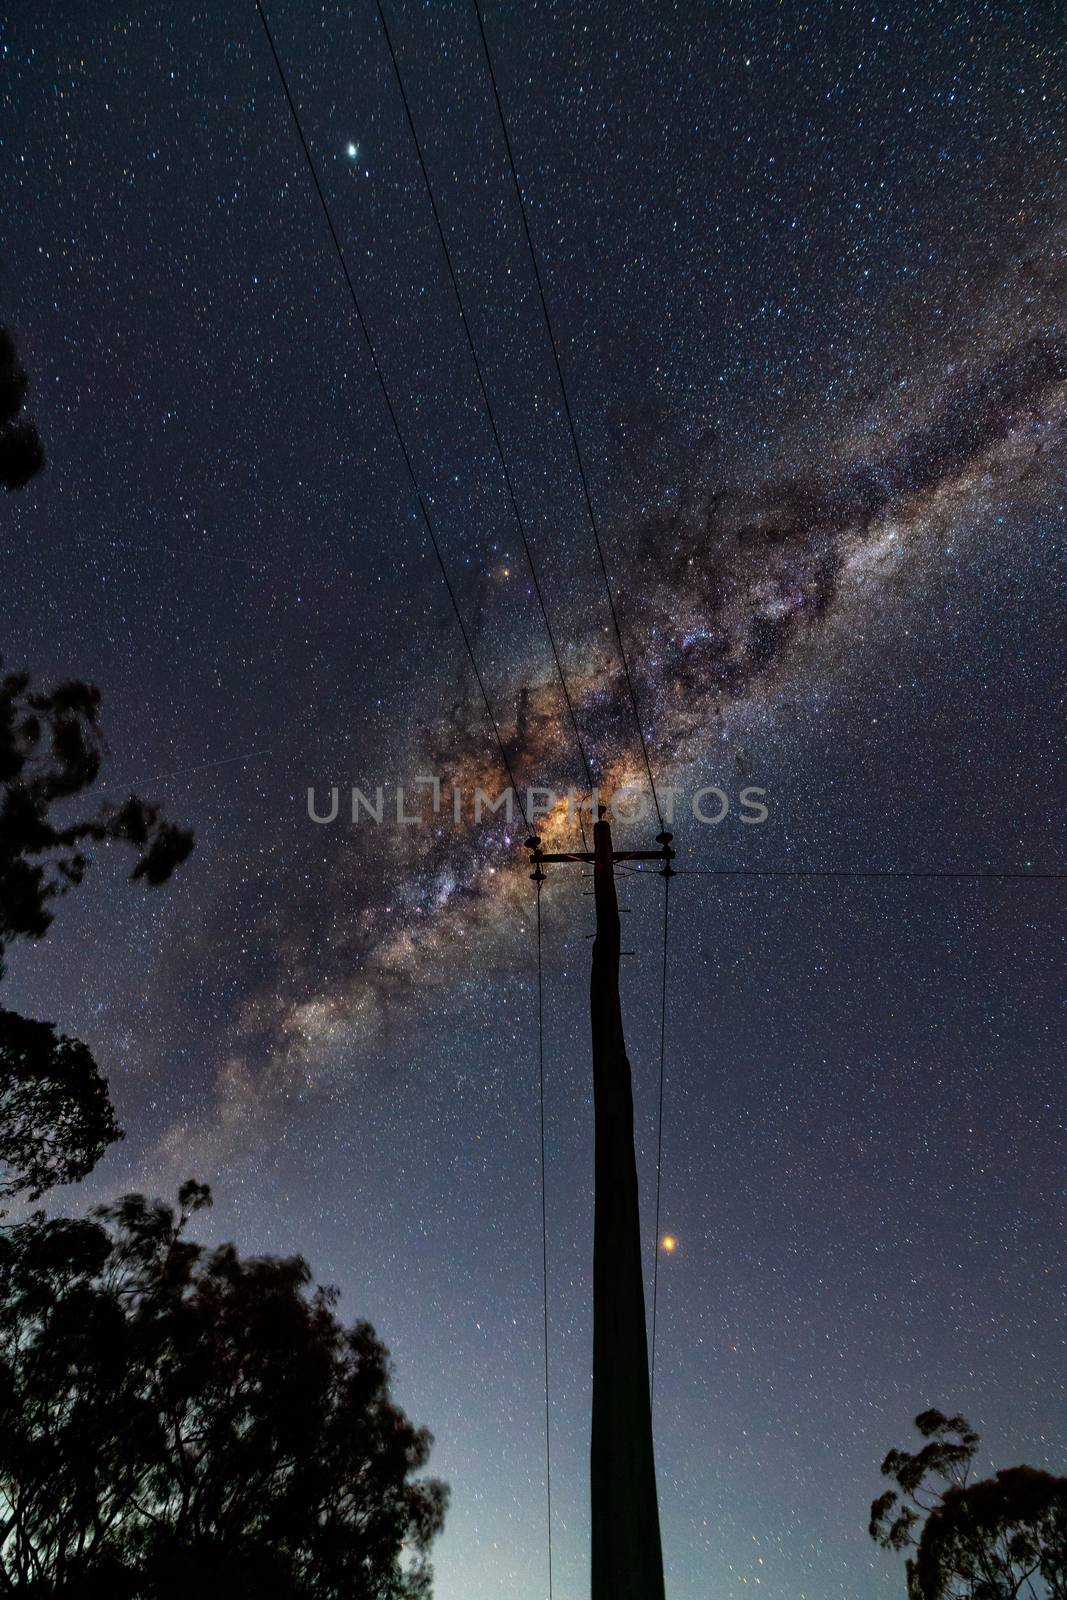 Milky way universe, shining stars and galactic core high in the sky over suburbia